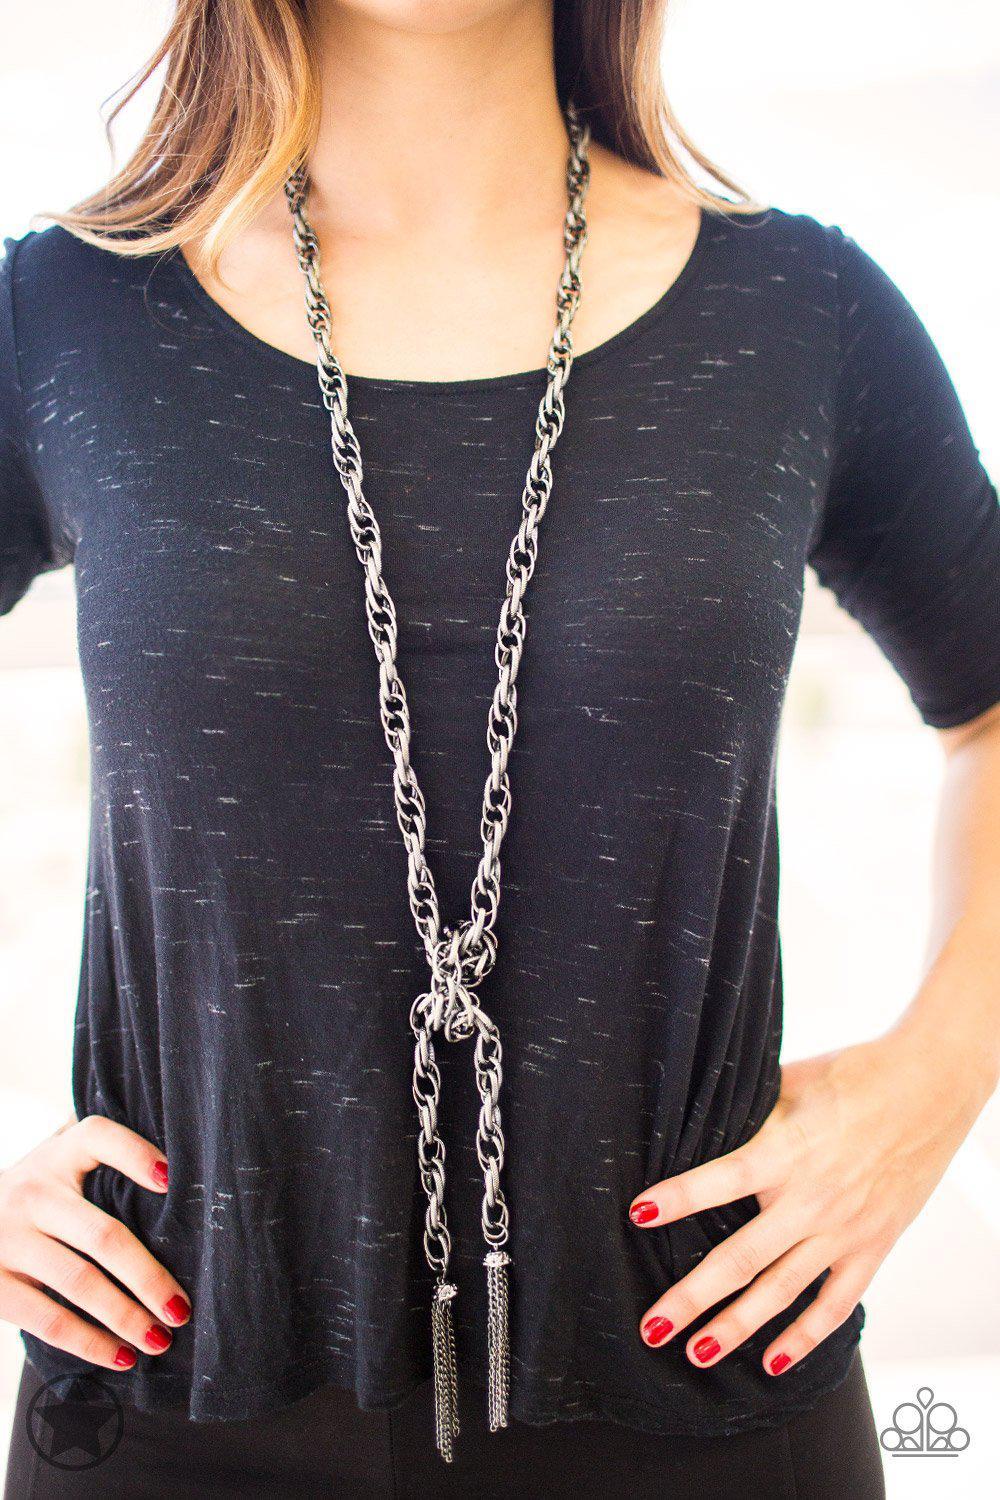 Scarfed for Attention Gunmetal Chain Necklace and matching Earrings - nautical knot style - Paparazzi Accessories-CarasShop.com - $5 Jewelry by Cara Jewels